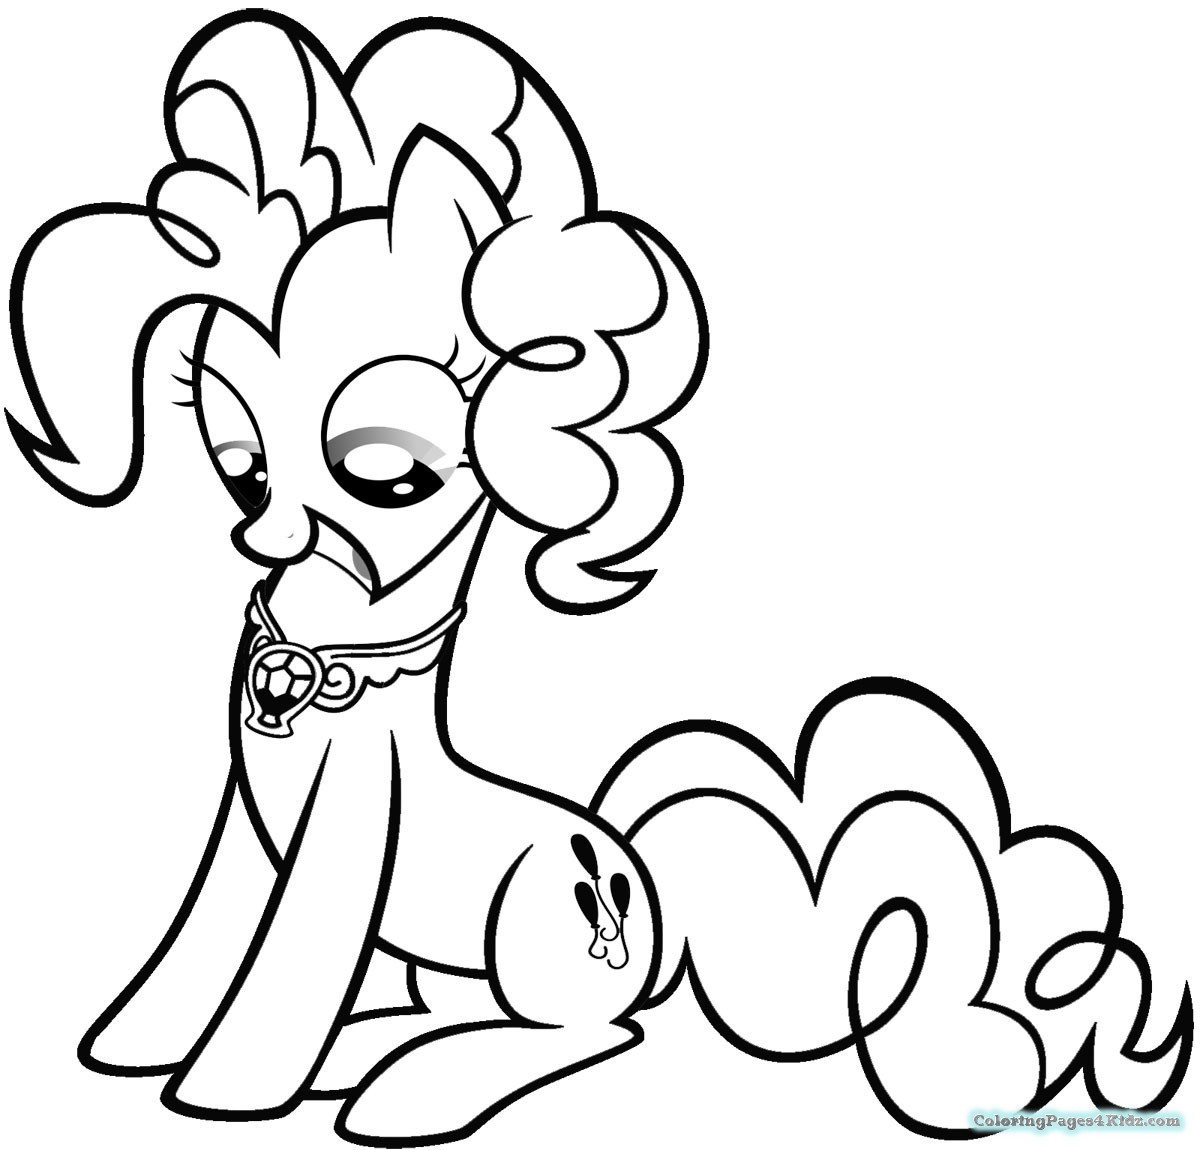 Equestria Girls Pinkie Pie Coloring Pages
 My Little Pony Equestria Girl Printable Coloring Pages at